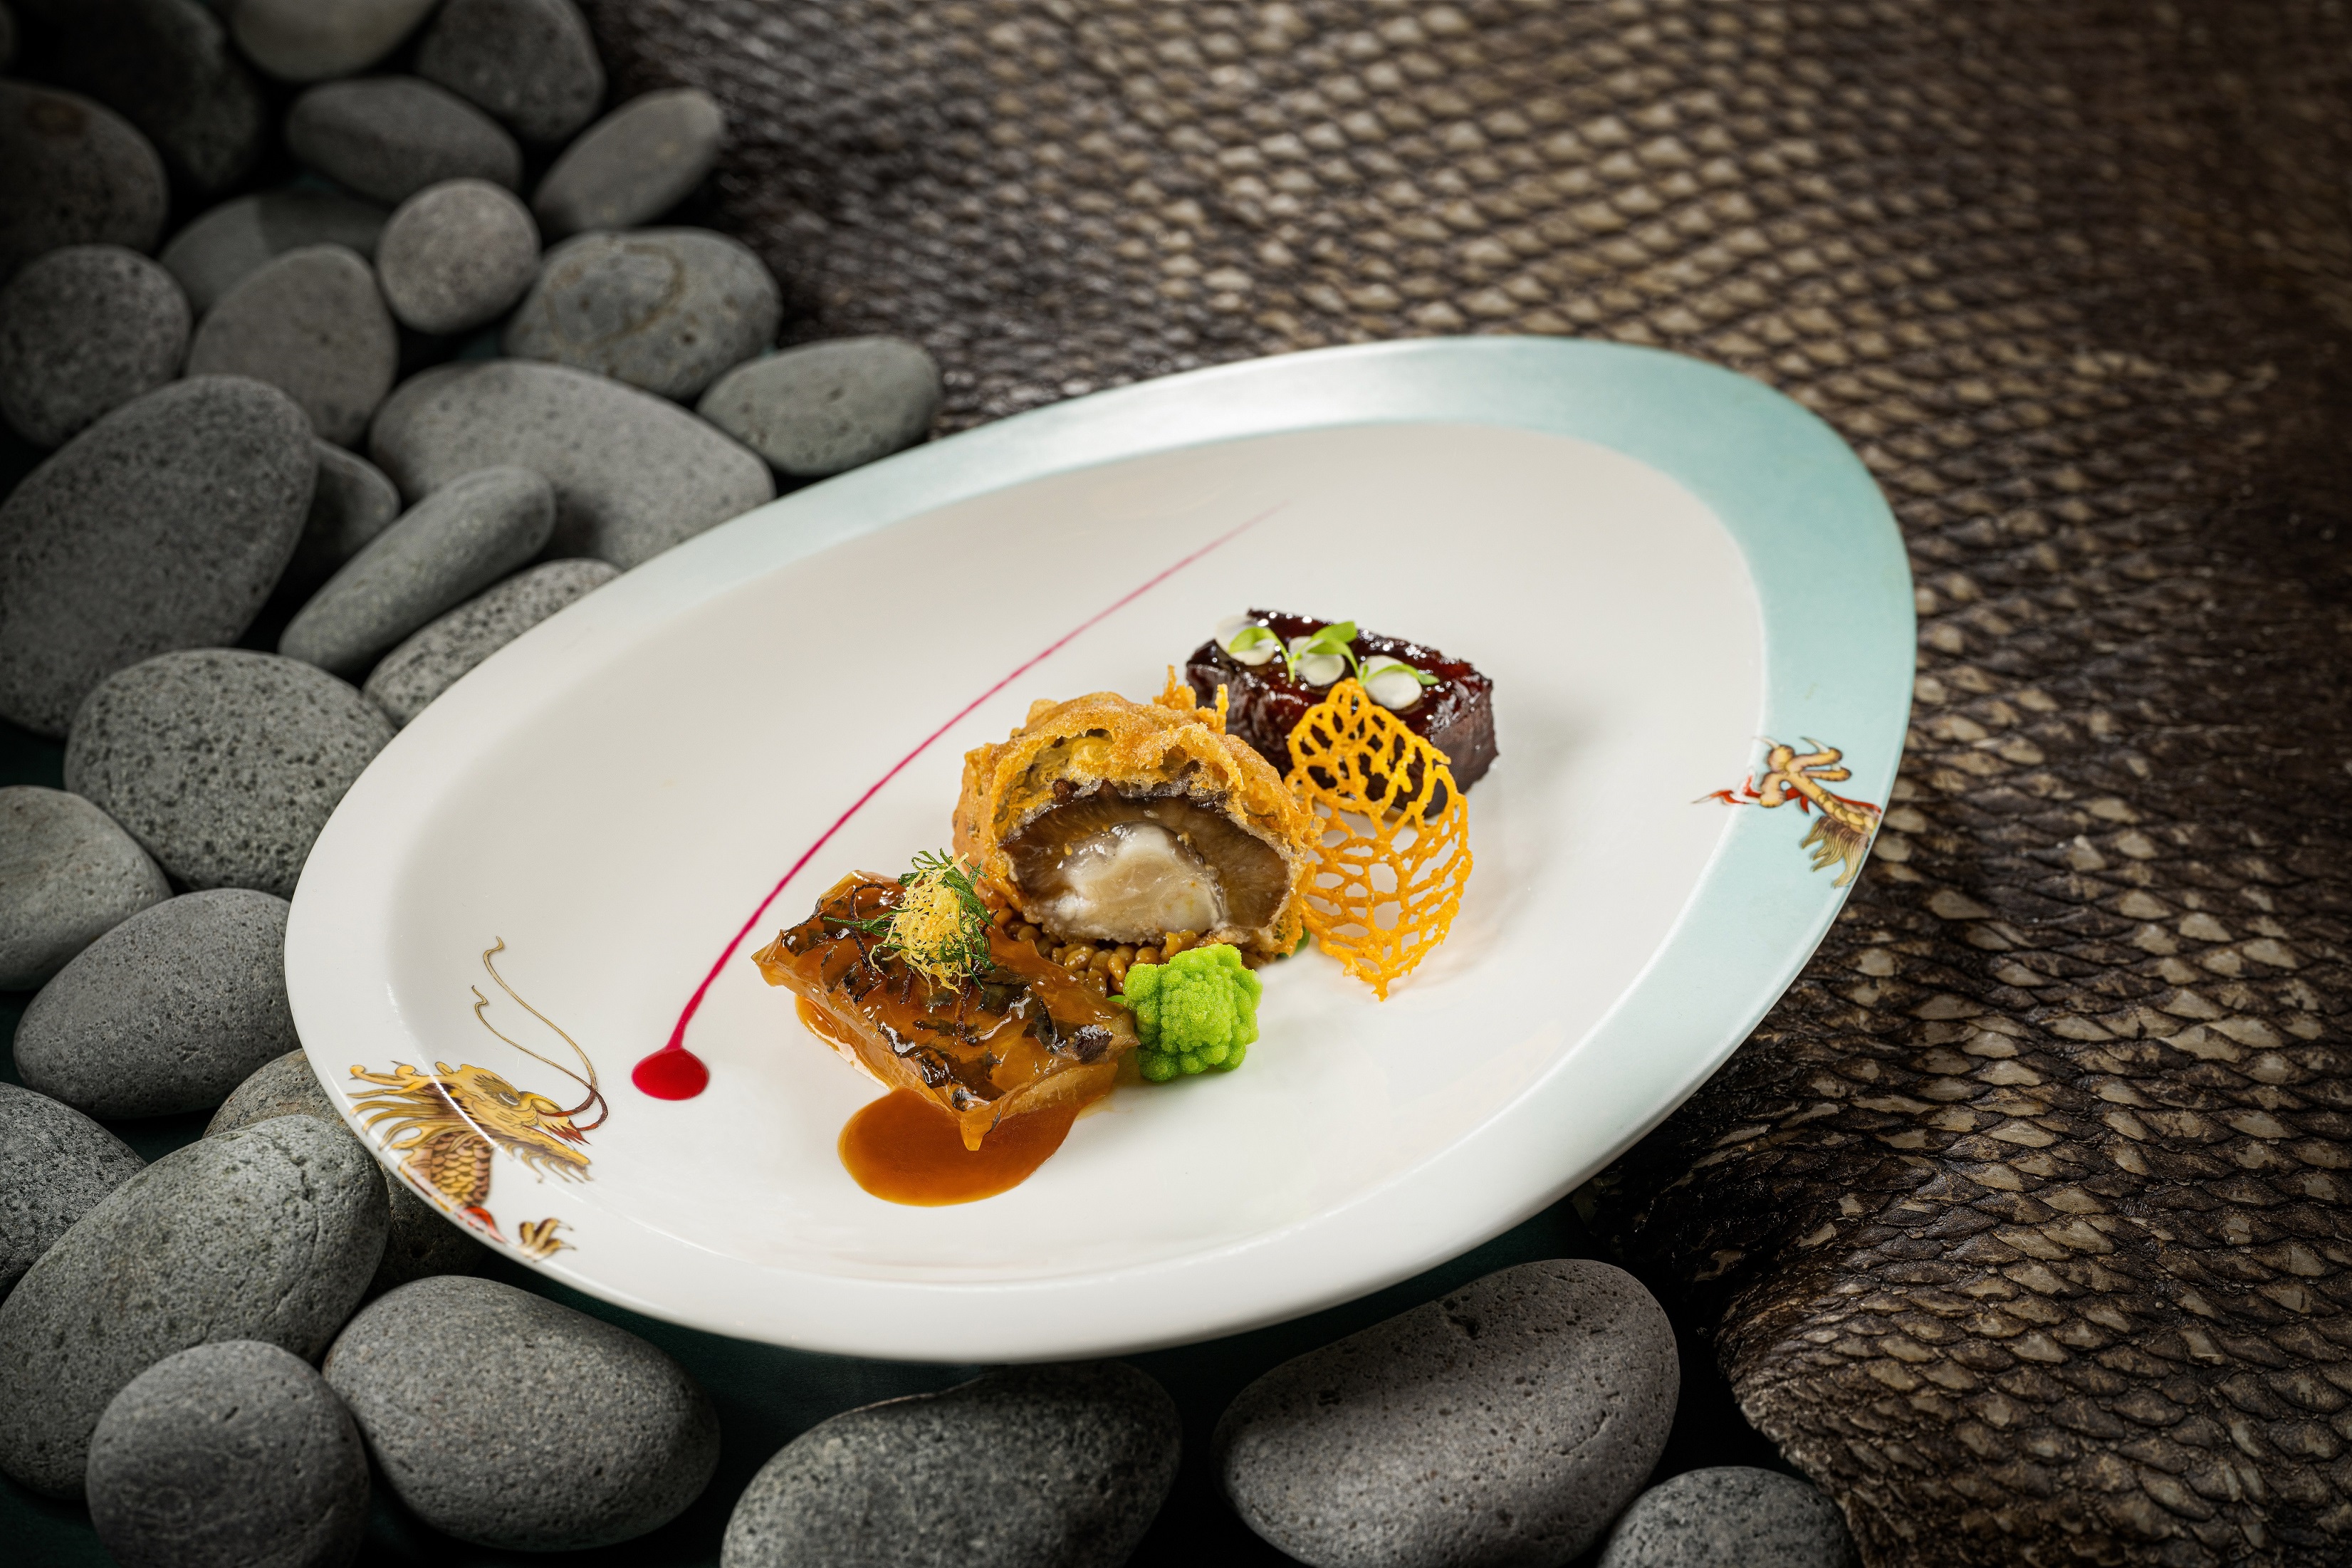 Crispy Giant Grouper Skin with Pomelo Peel, Deep-fried Sea Cucumber Stuffed with Minced Shrimp, Braised Wagyu Beef Cheek with Aged Tangerine Peel Sauce, jointly by Pearl Dragon and Xizhou Hall